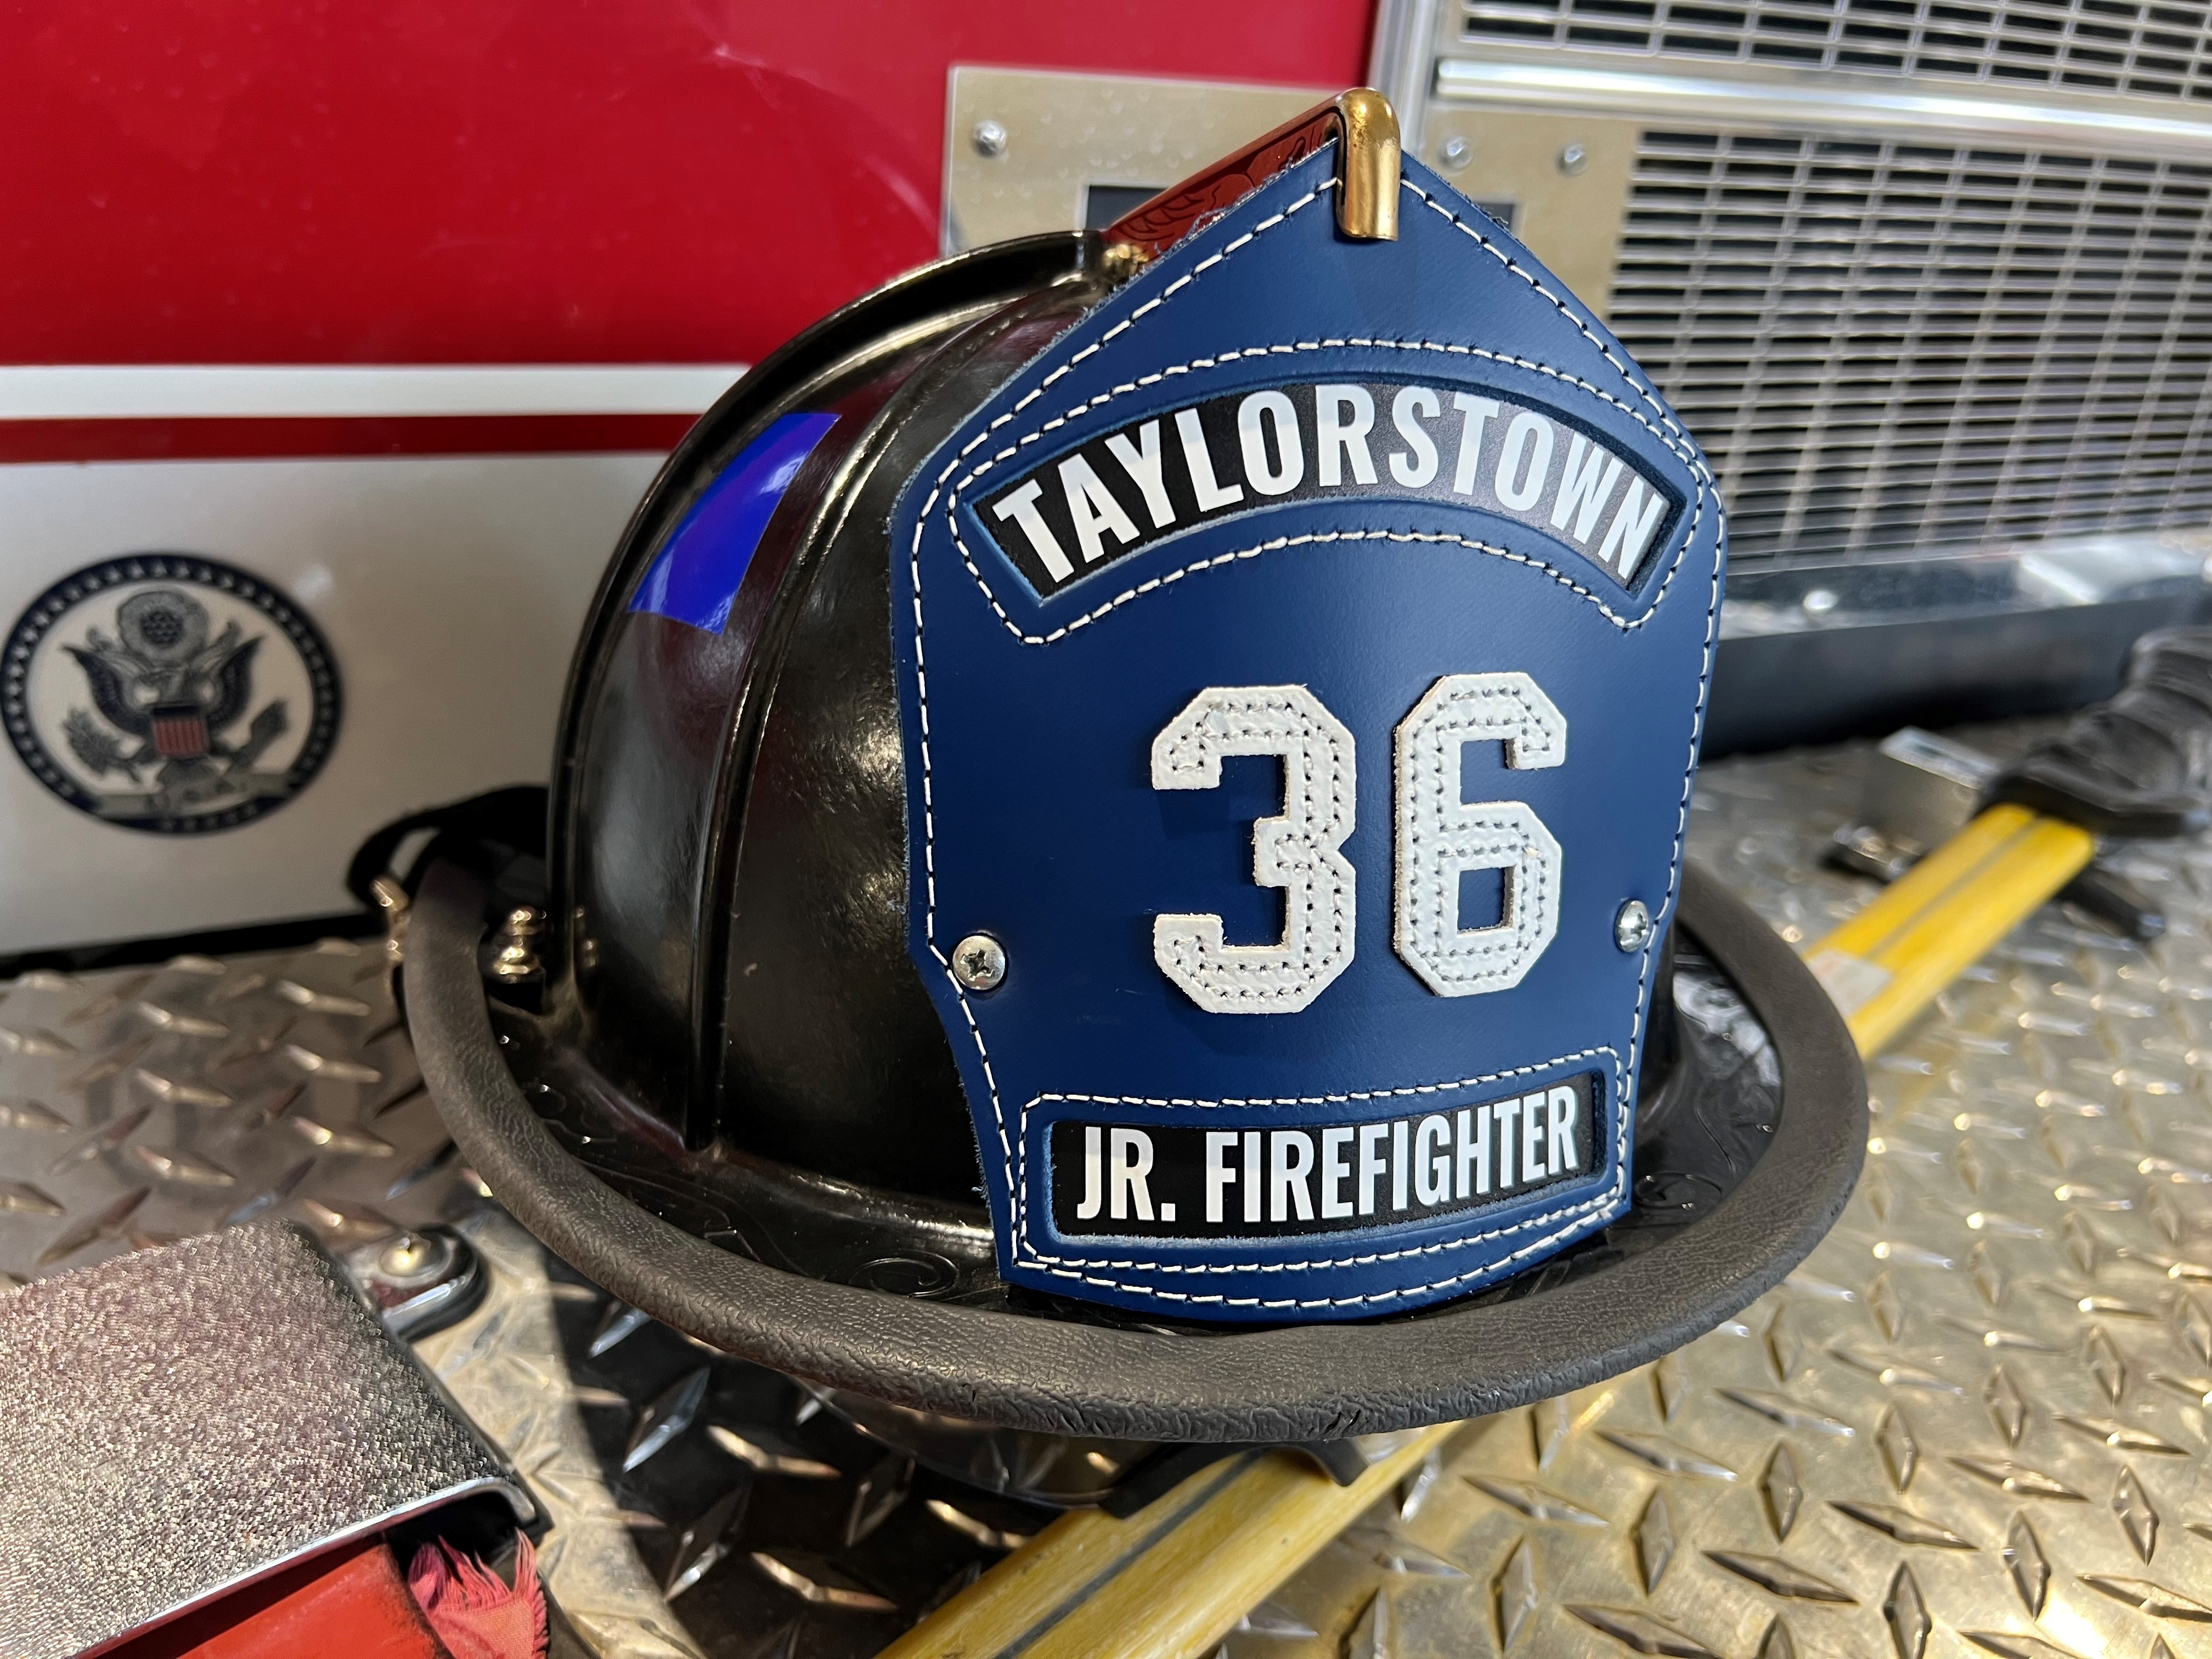 photo of a fire fighter helmet with the words Taylorstown Jr. Firefighter, number 36.